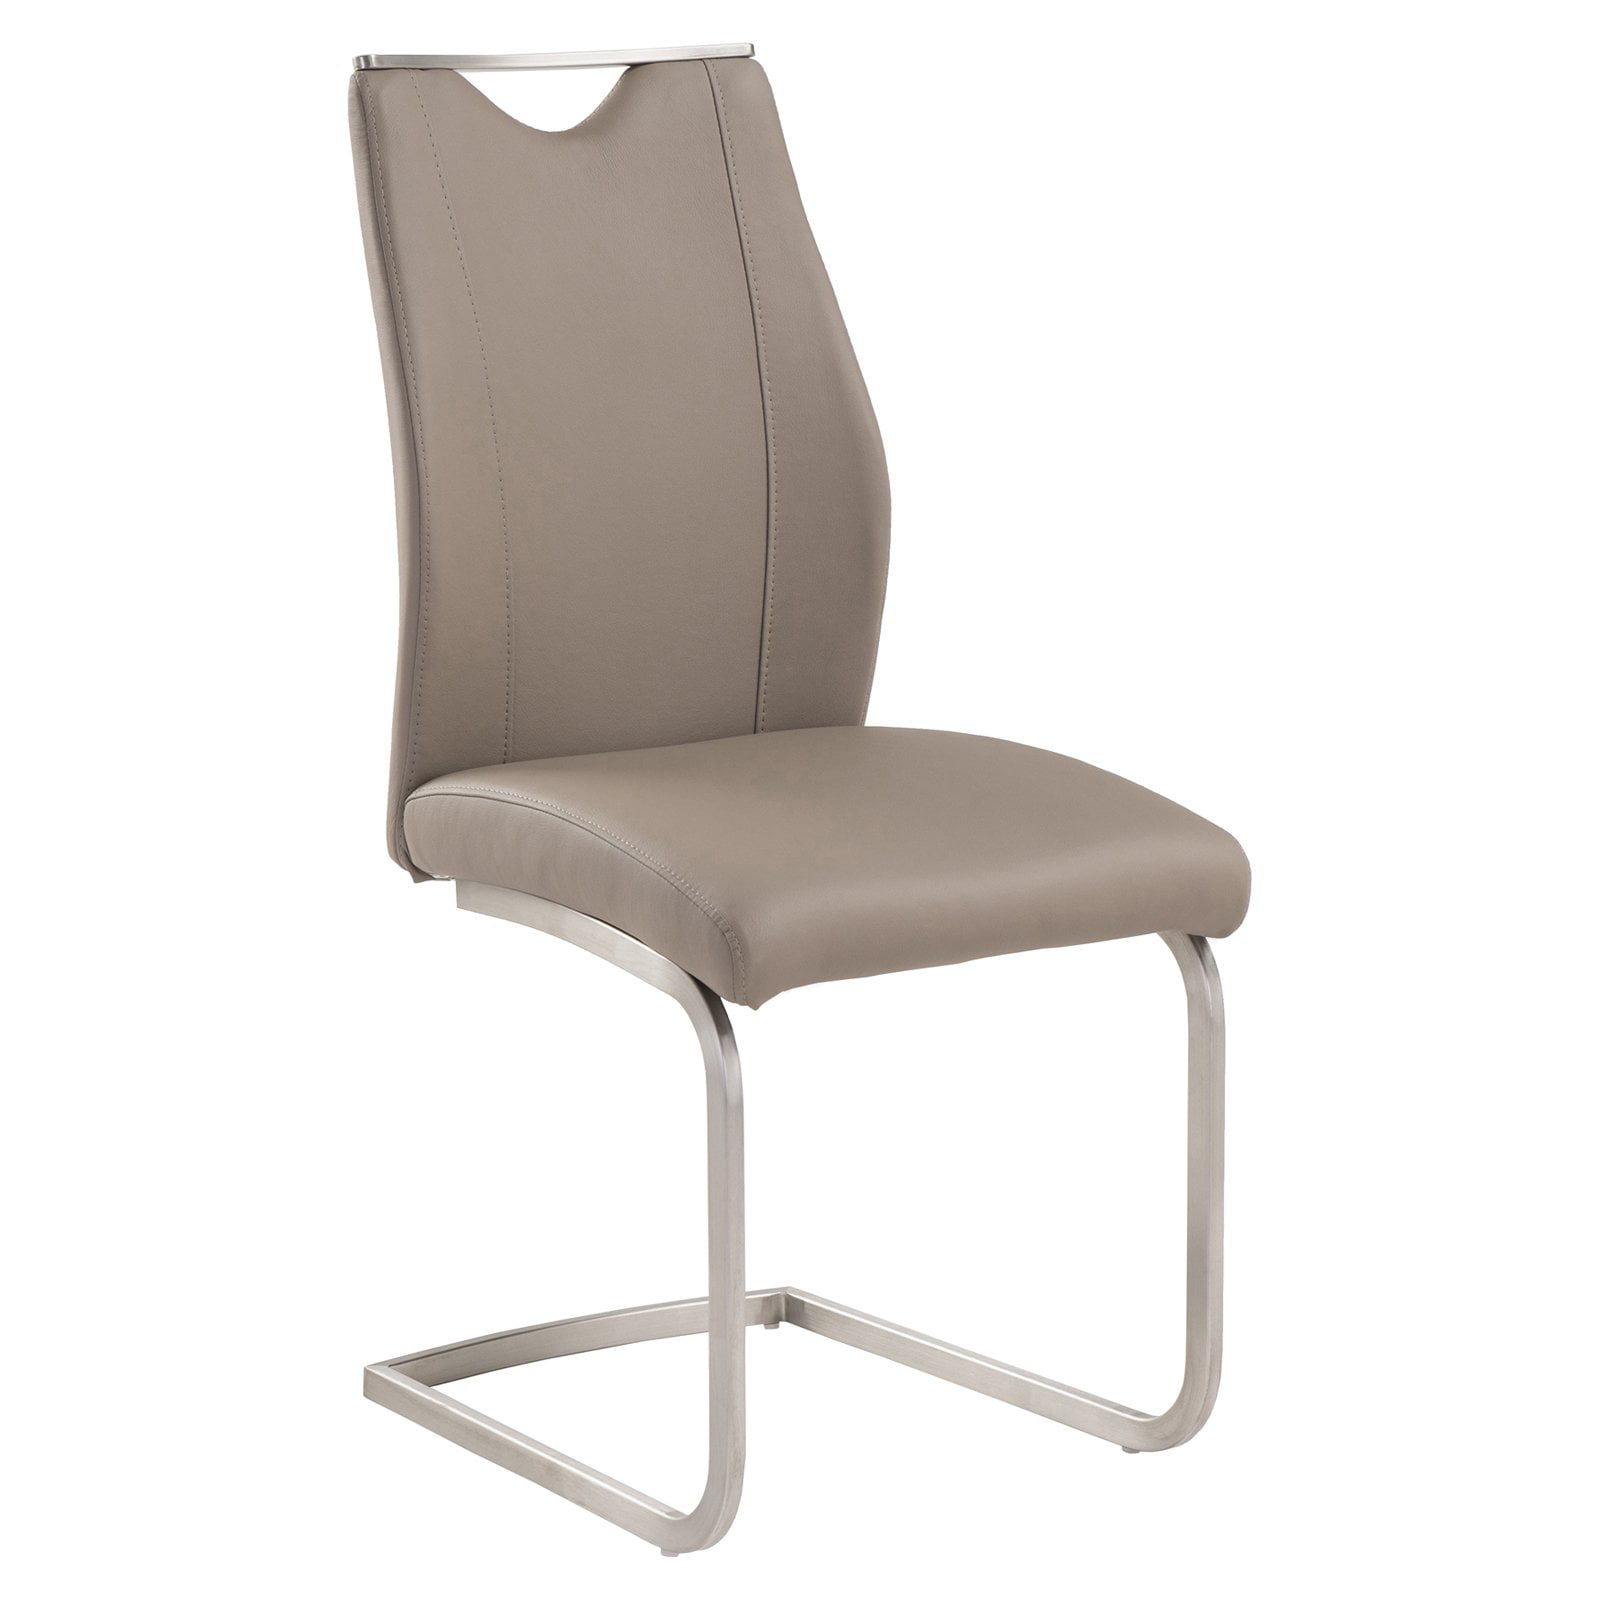 Lcbrsicf Bravo Contemporary Side Chair In Coffee And Stainless Steel